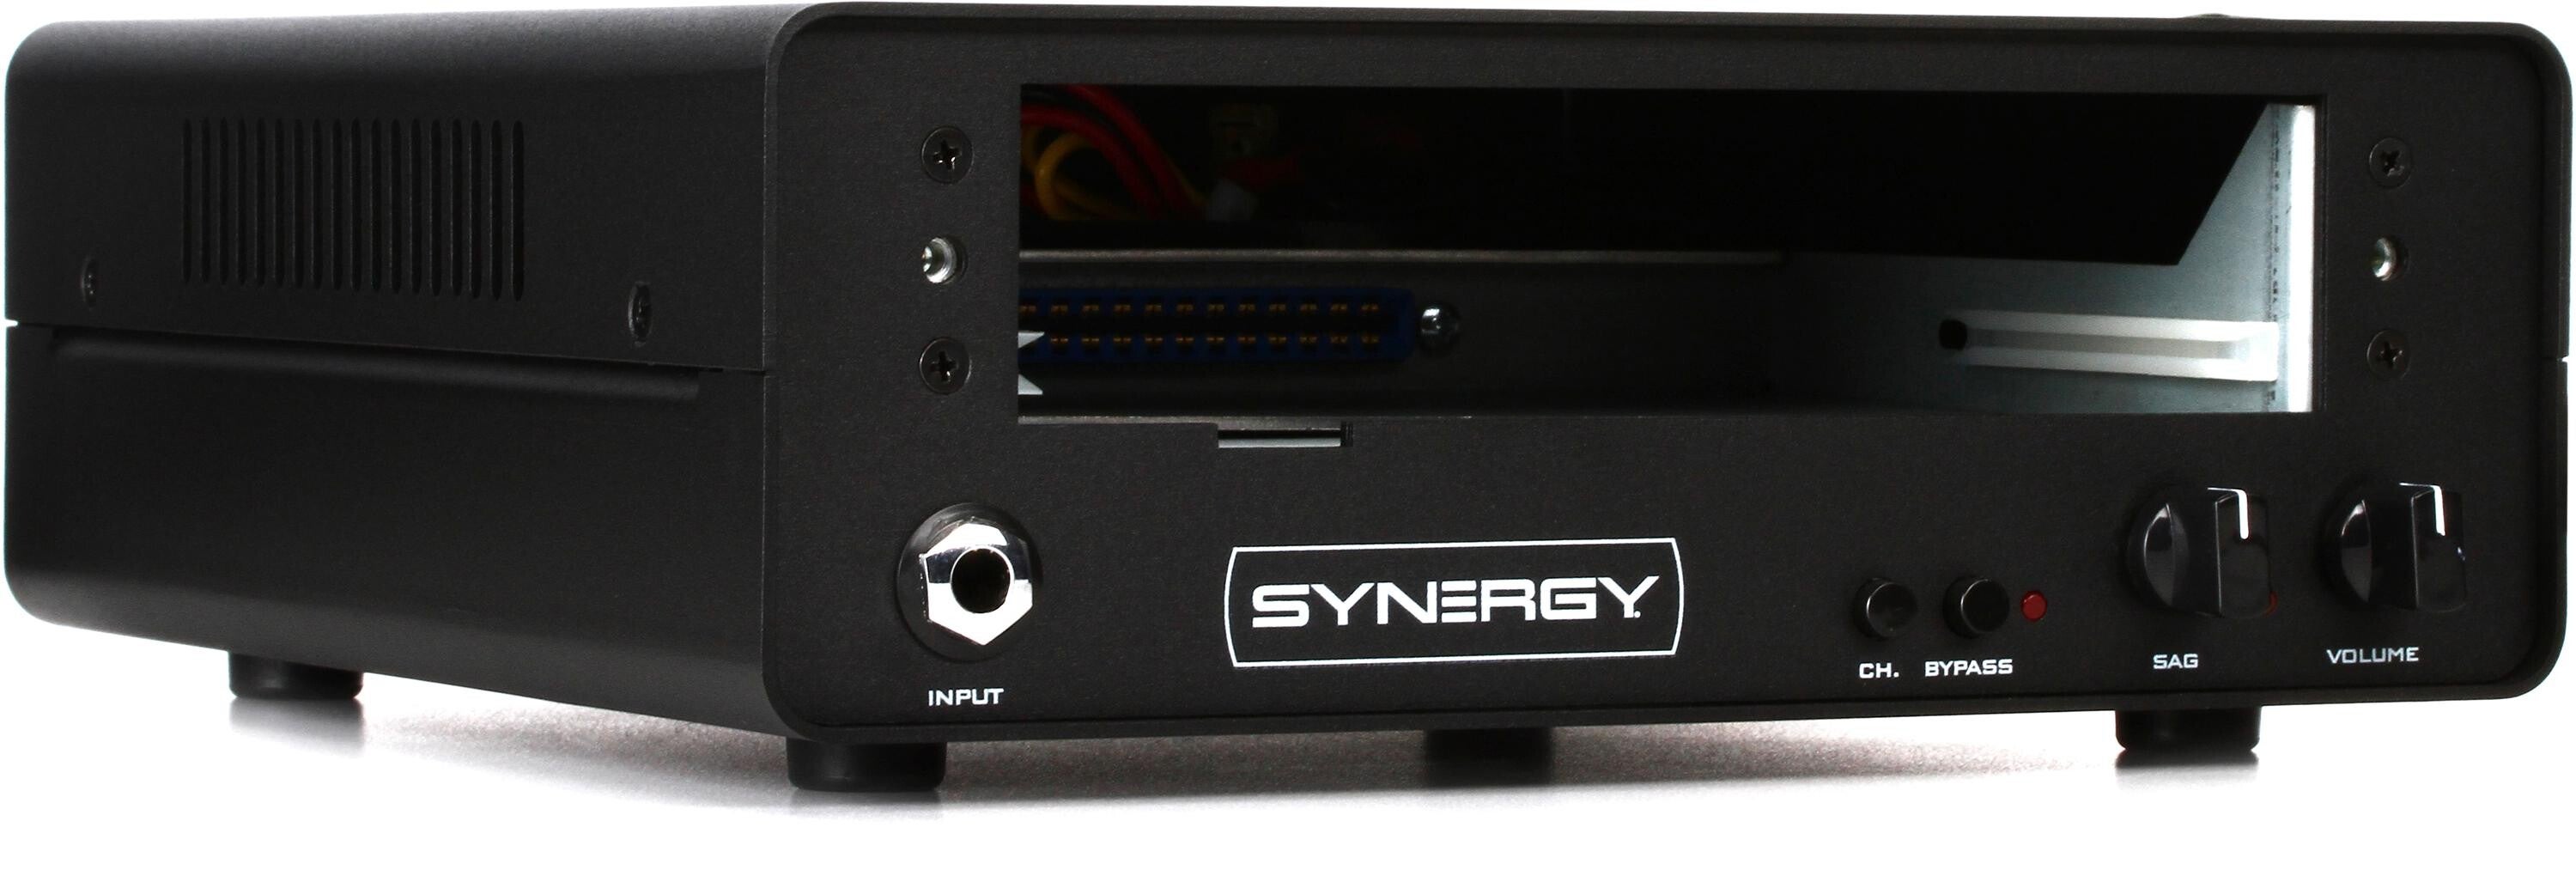 Synergy SYN1 Tabletop Preamp Single Module Dock | Sweetwater